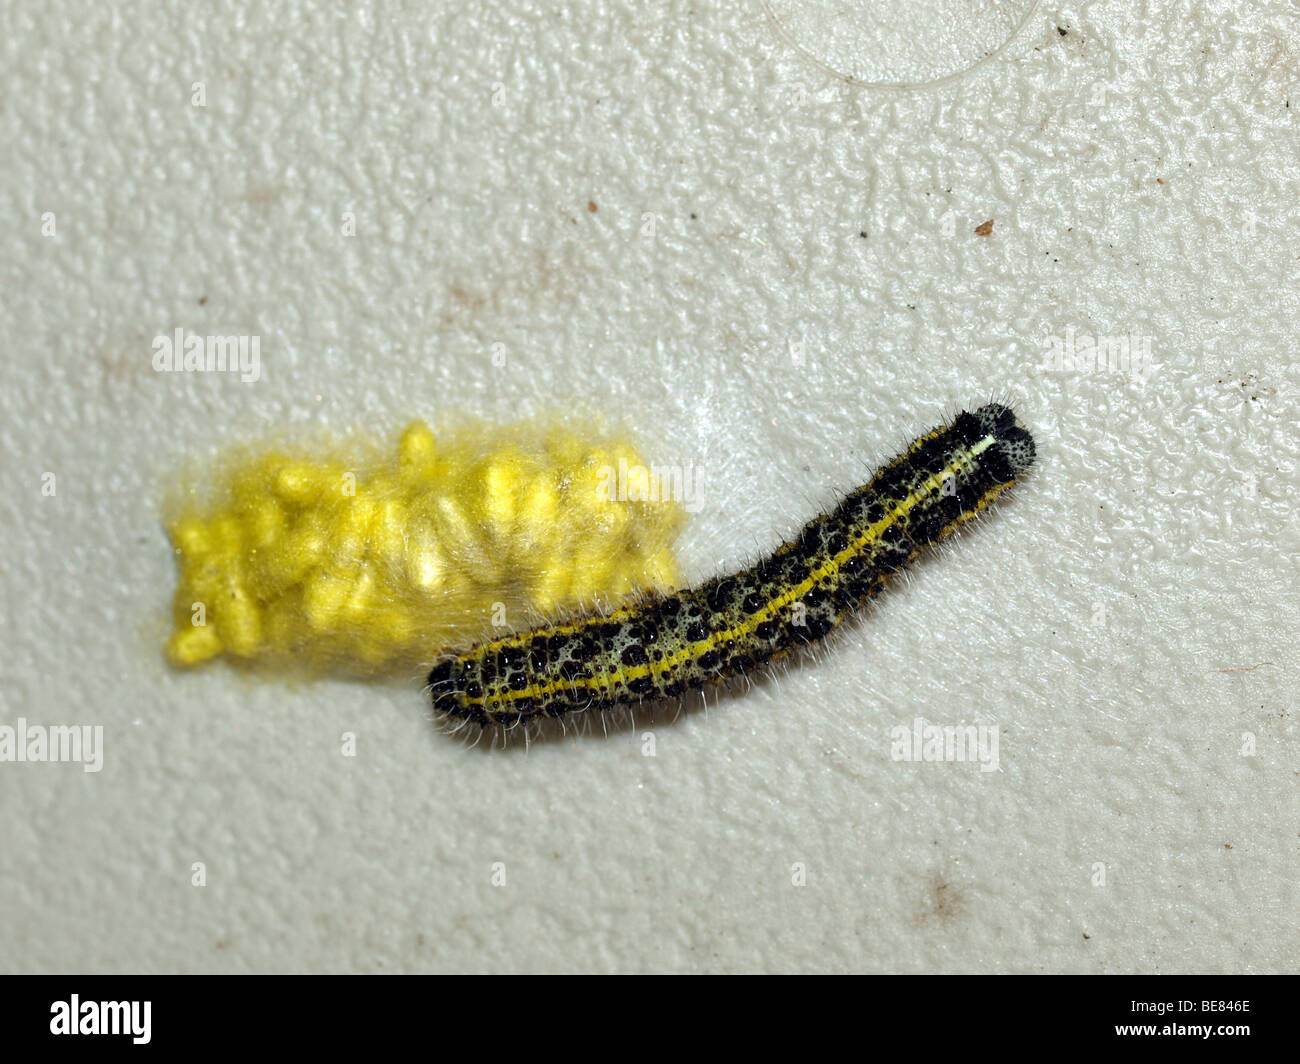 Caterpillar of a small white butterfly with the yellow cocoons of the braconid wasp(Apanteles glomeratus). Stock Photo